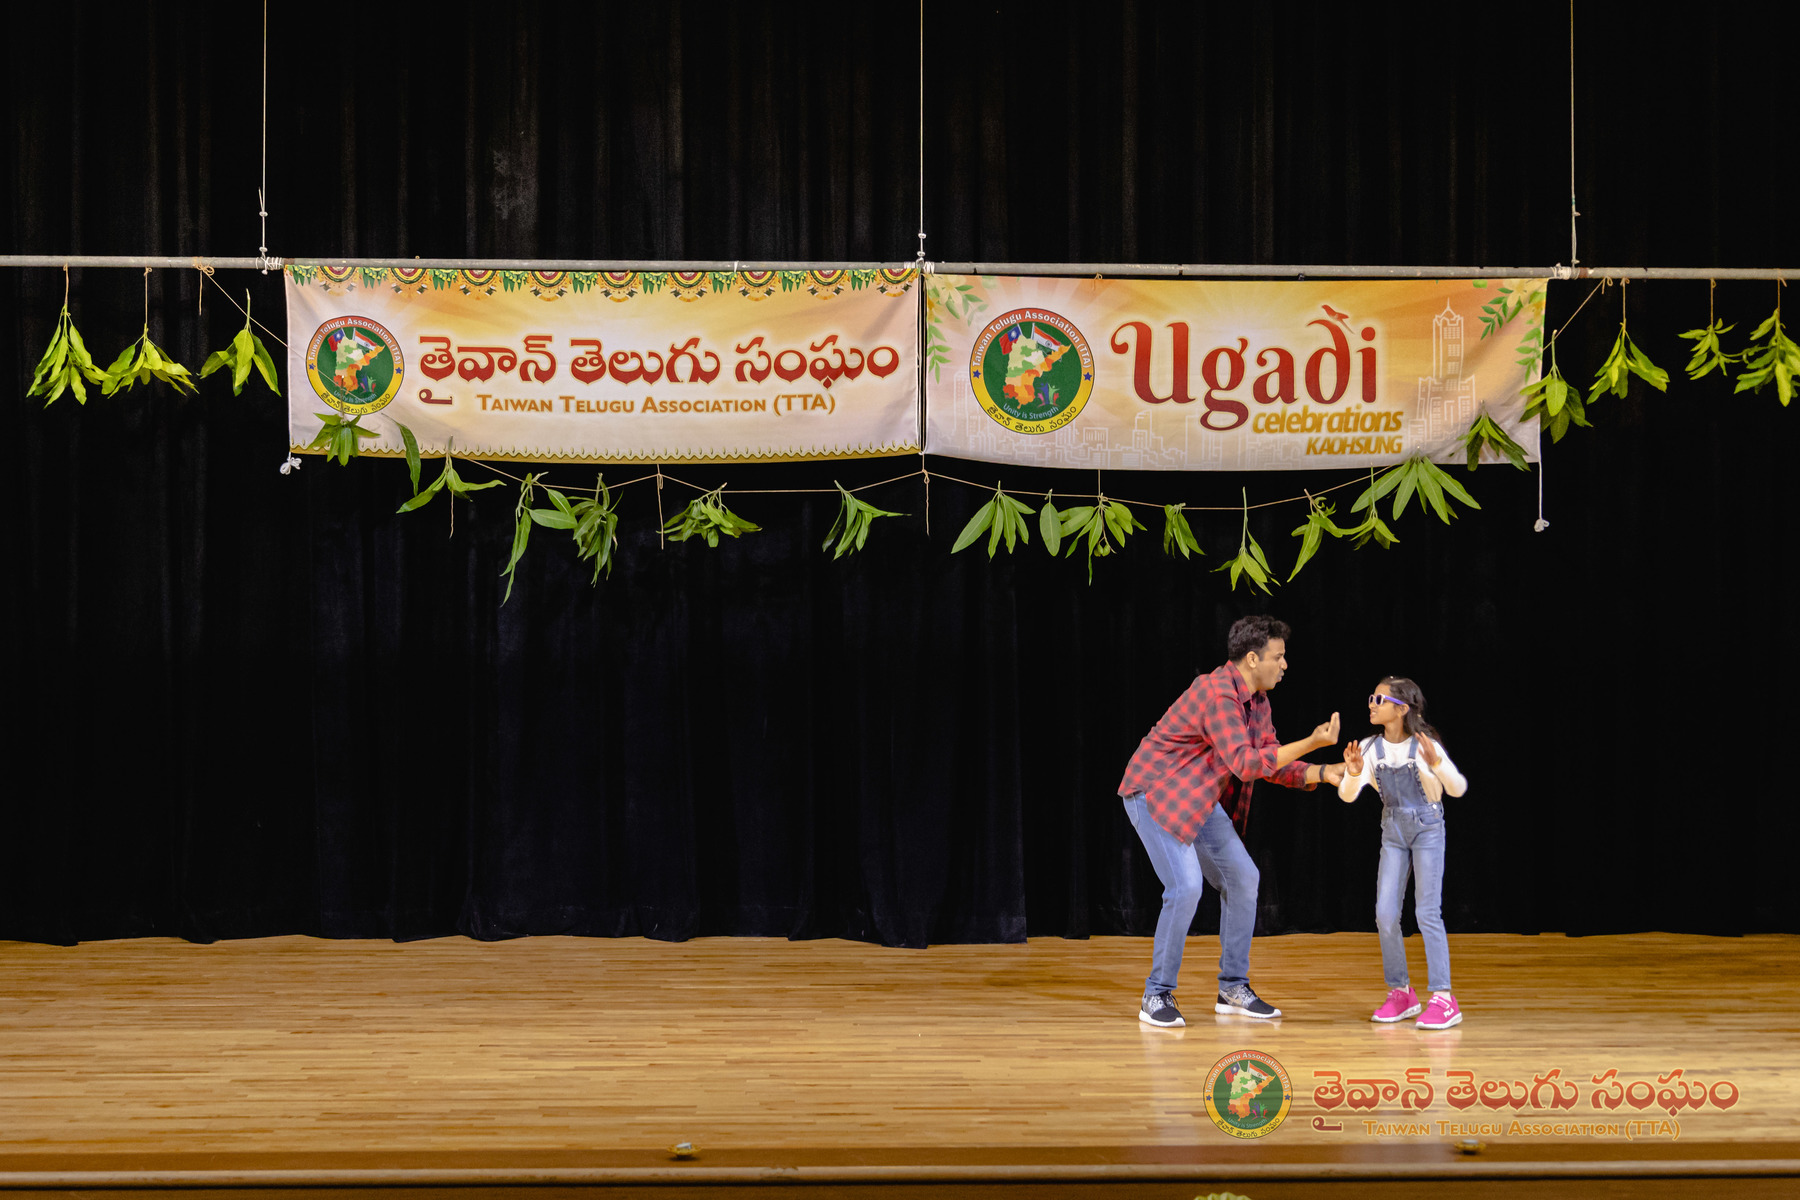 Dr. Rama Krishna Kishore, an alumnus of the College of Management, NSYSU, performed a dynamic Tollywood dance with his daughter, much appreciated by the audience.